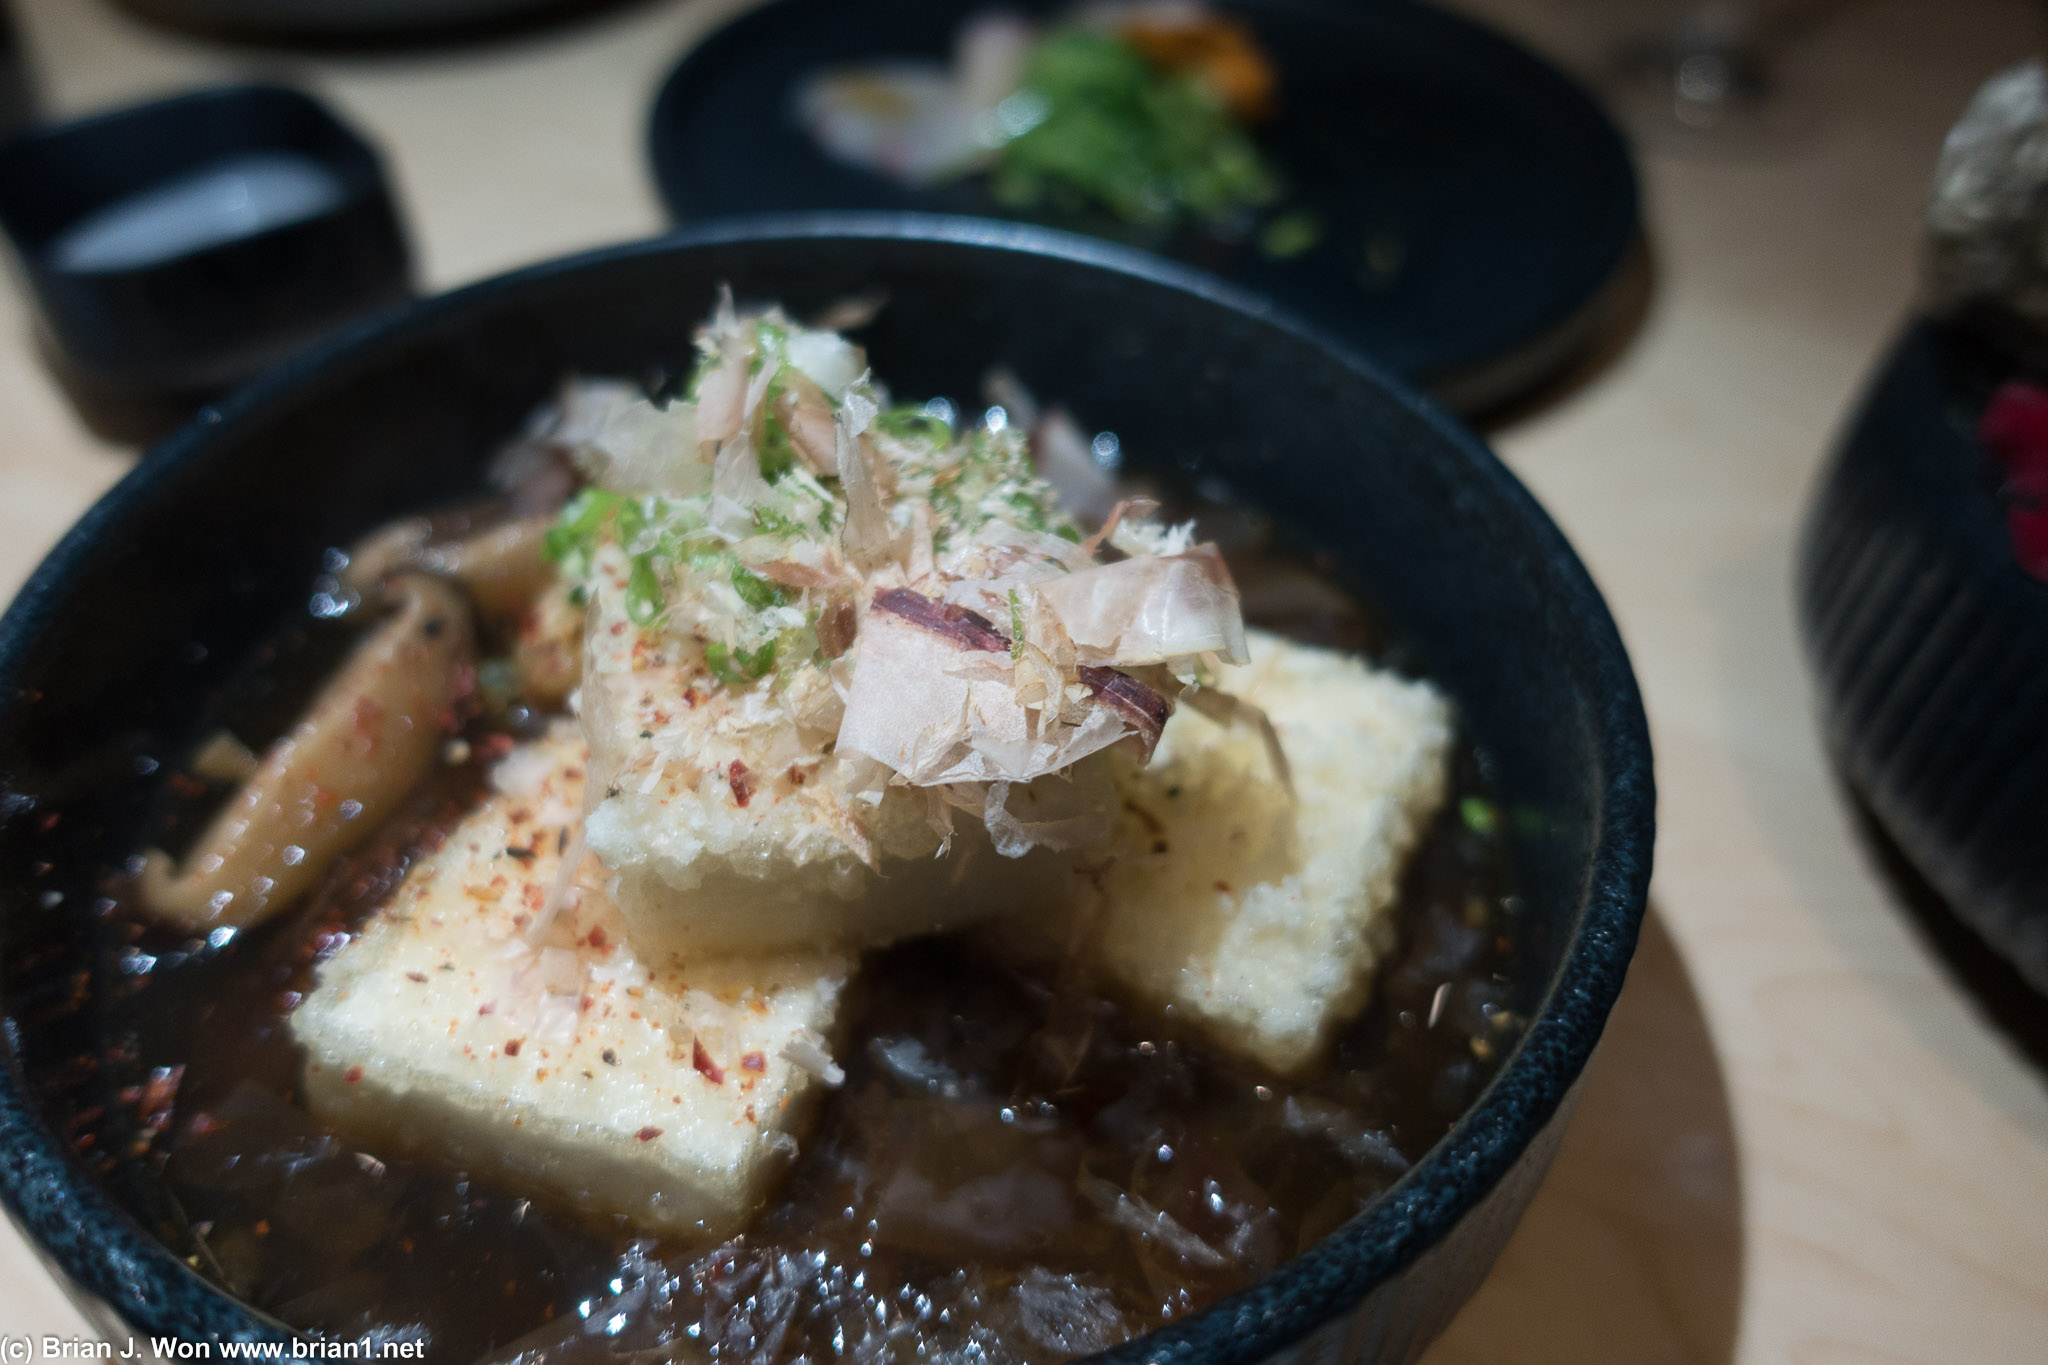 Agedashi tofu. Might have been the second best item here?